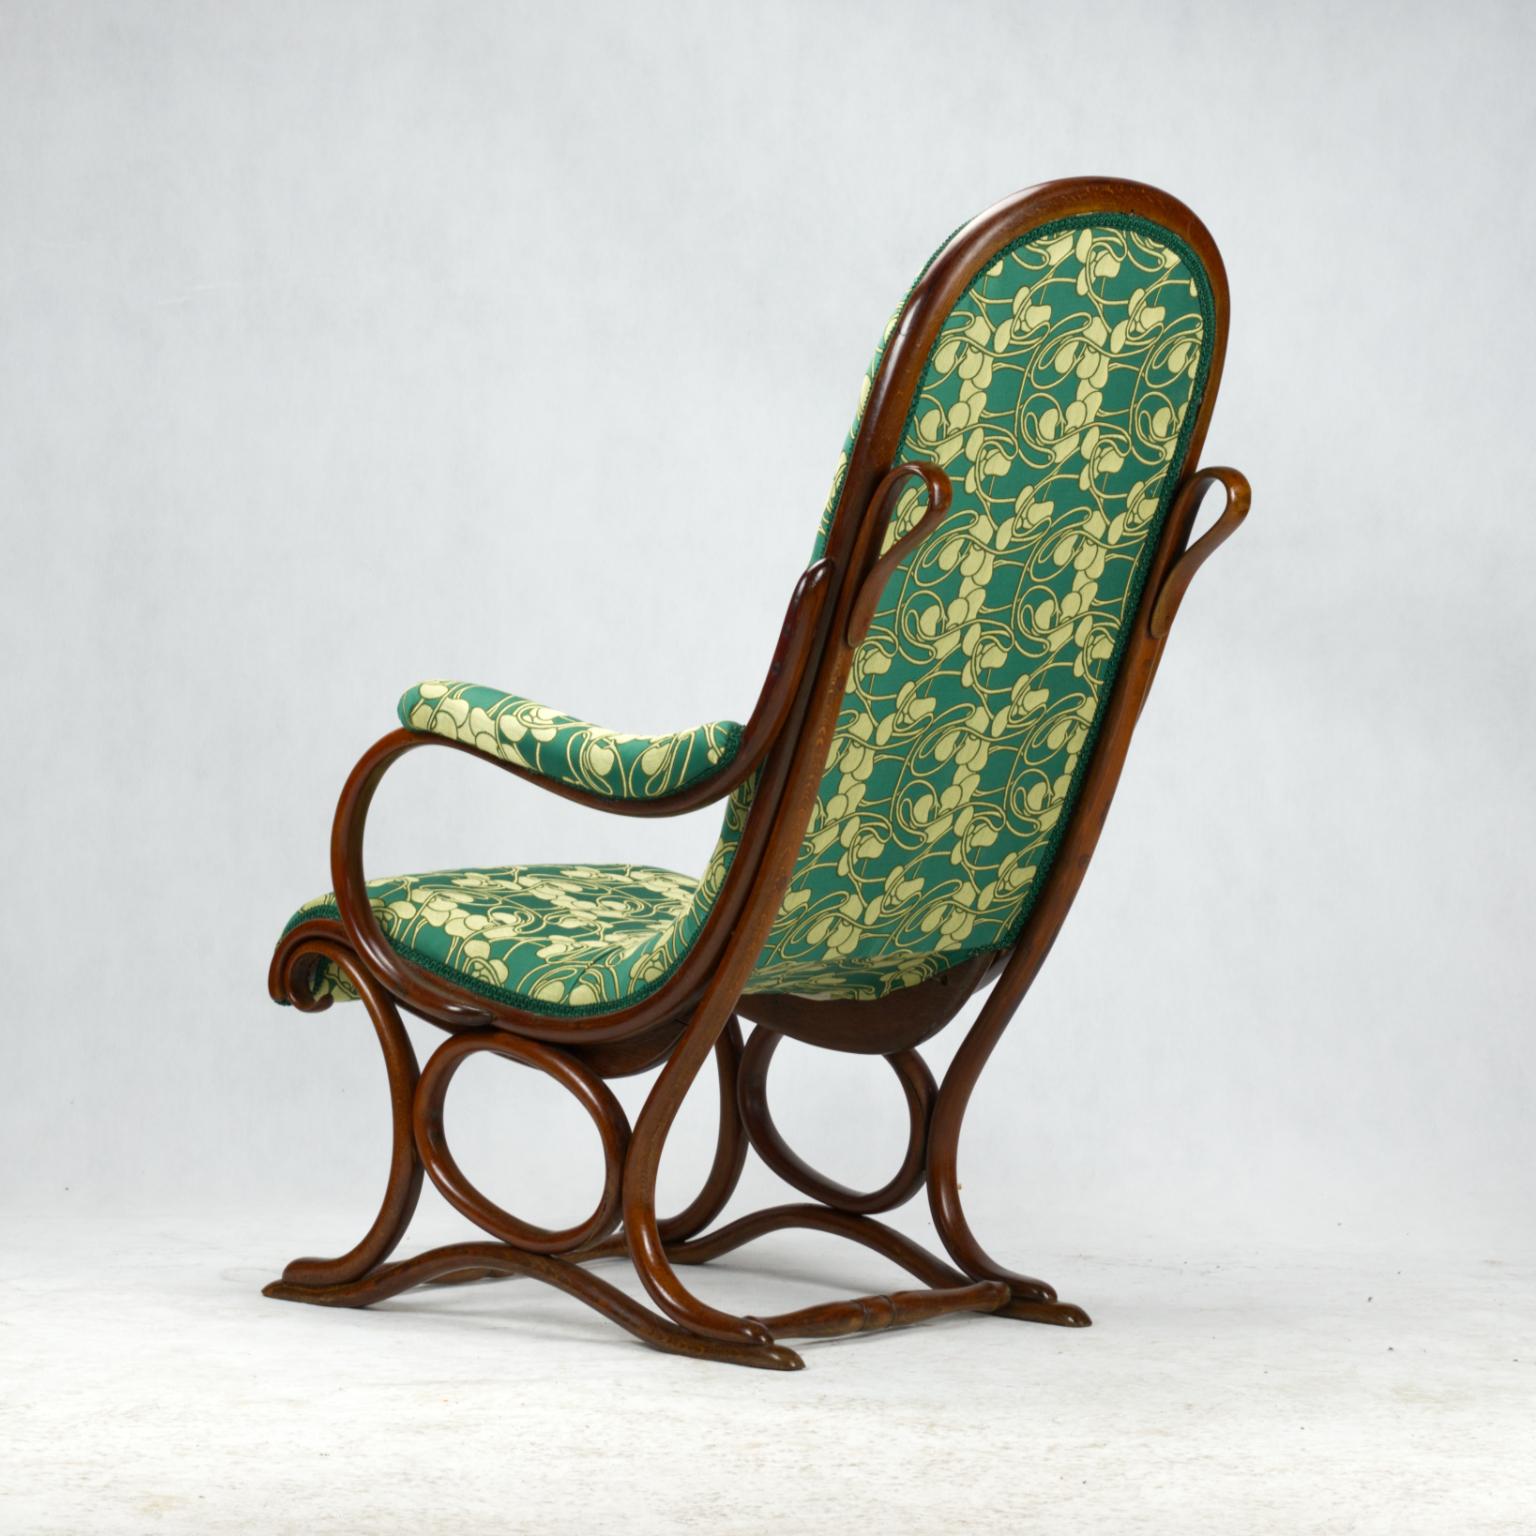 Art Nouveau Bentwood Salonfauteuil Easy Chair / Armchair Thonet No. 1 circa 1890 In Good Condition For Sale In Lucenec, SK